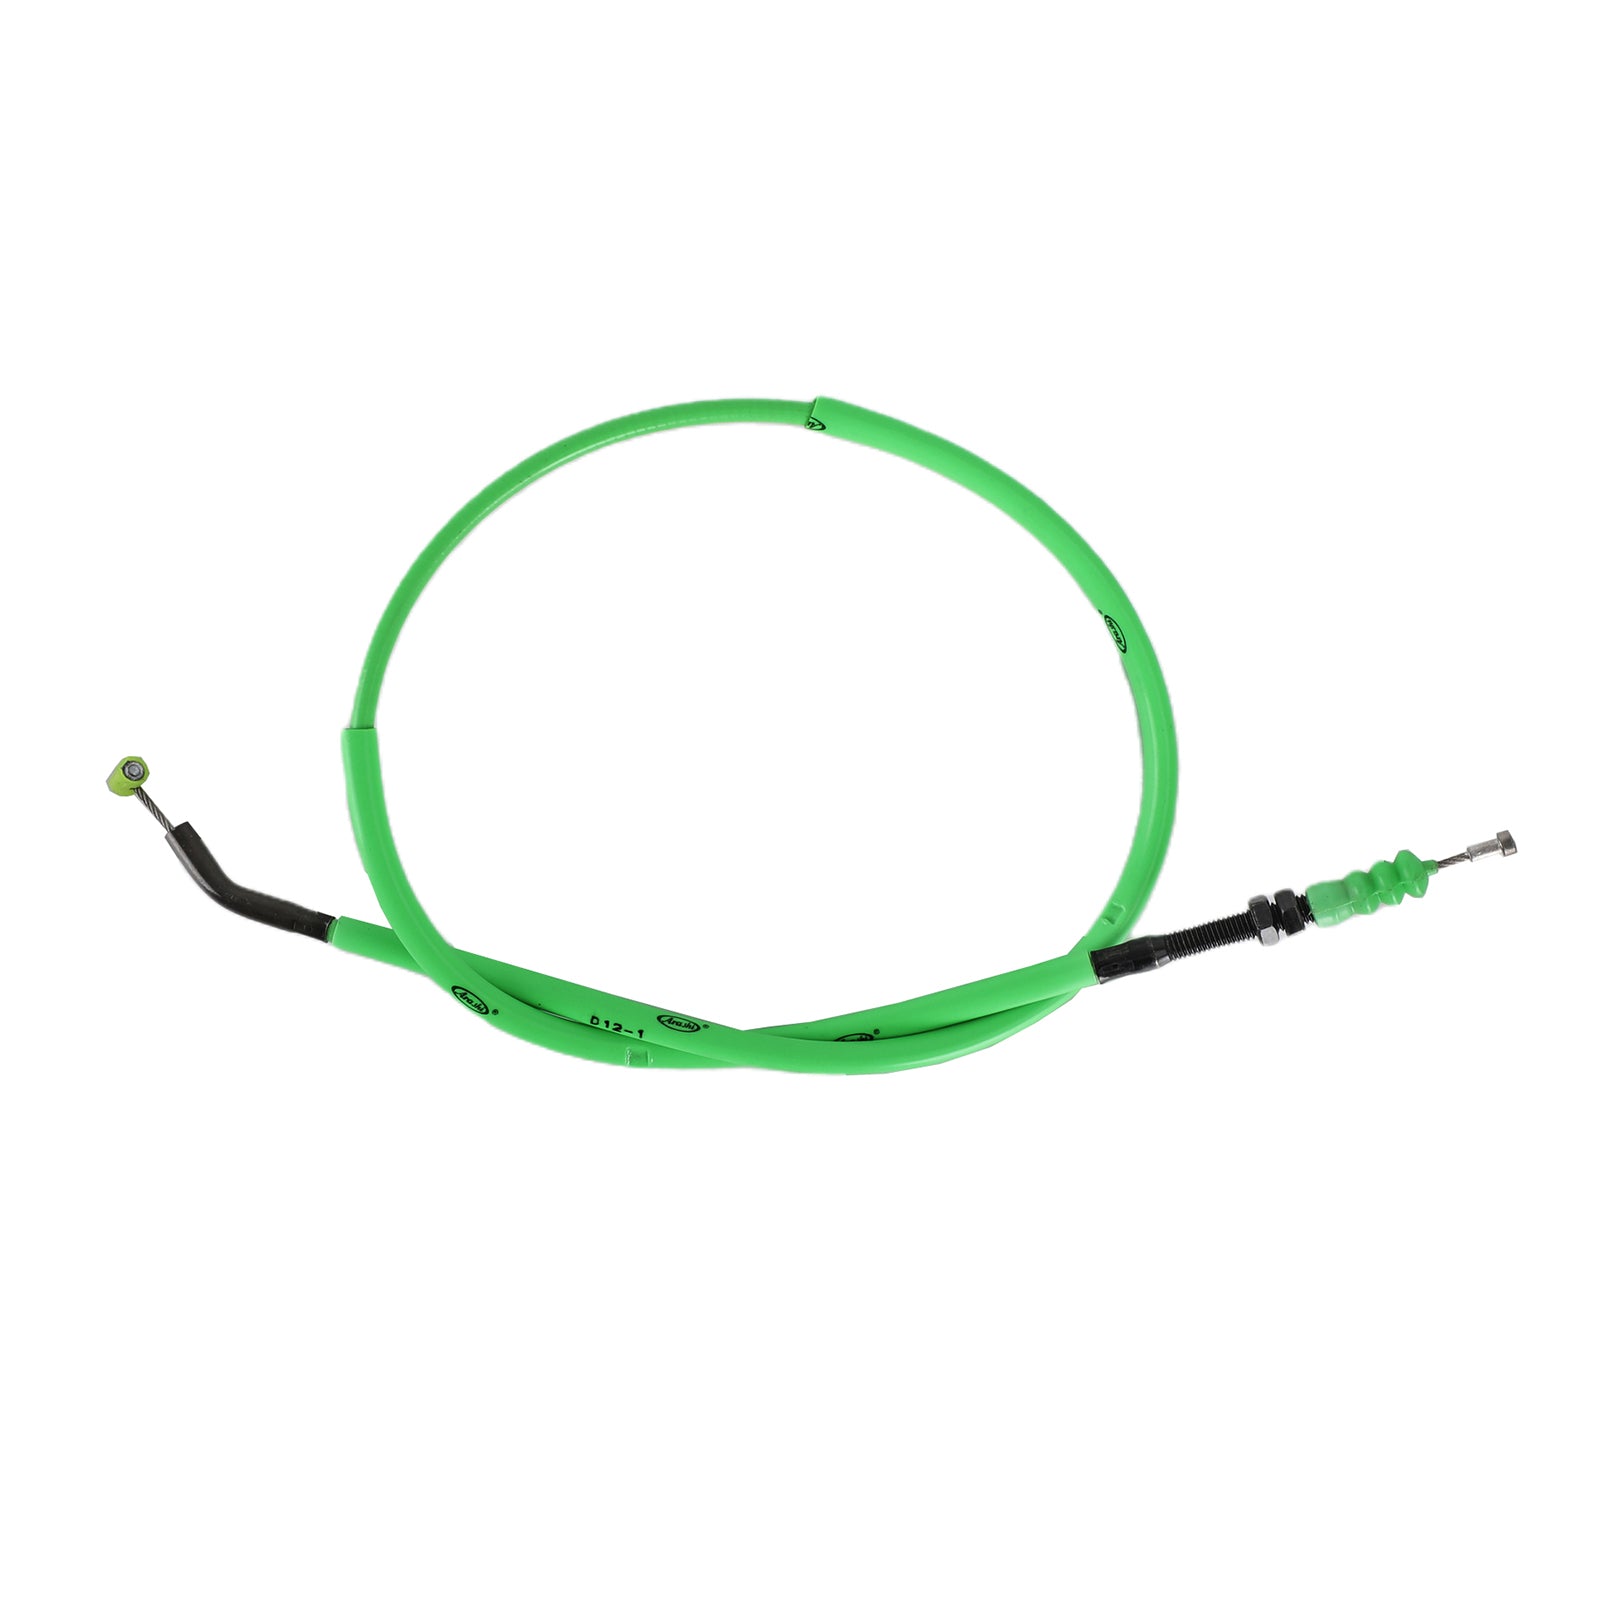 17-20 Kawasaki Z650 Motorcycle Clutch Cable Replacement